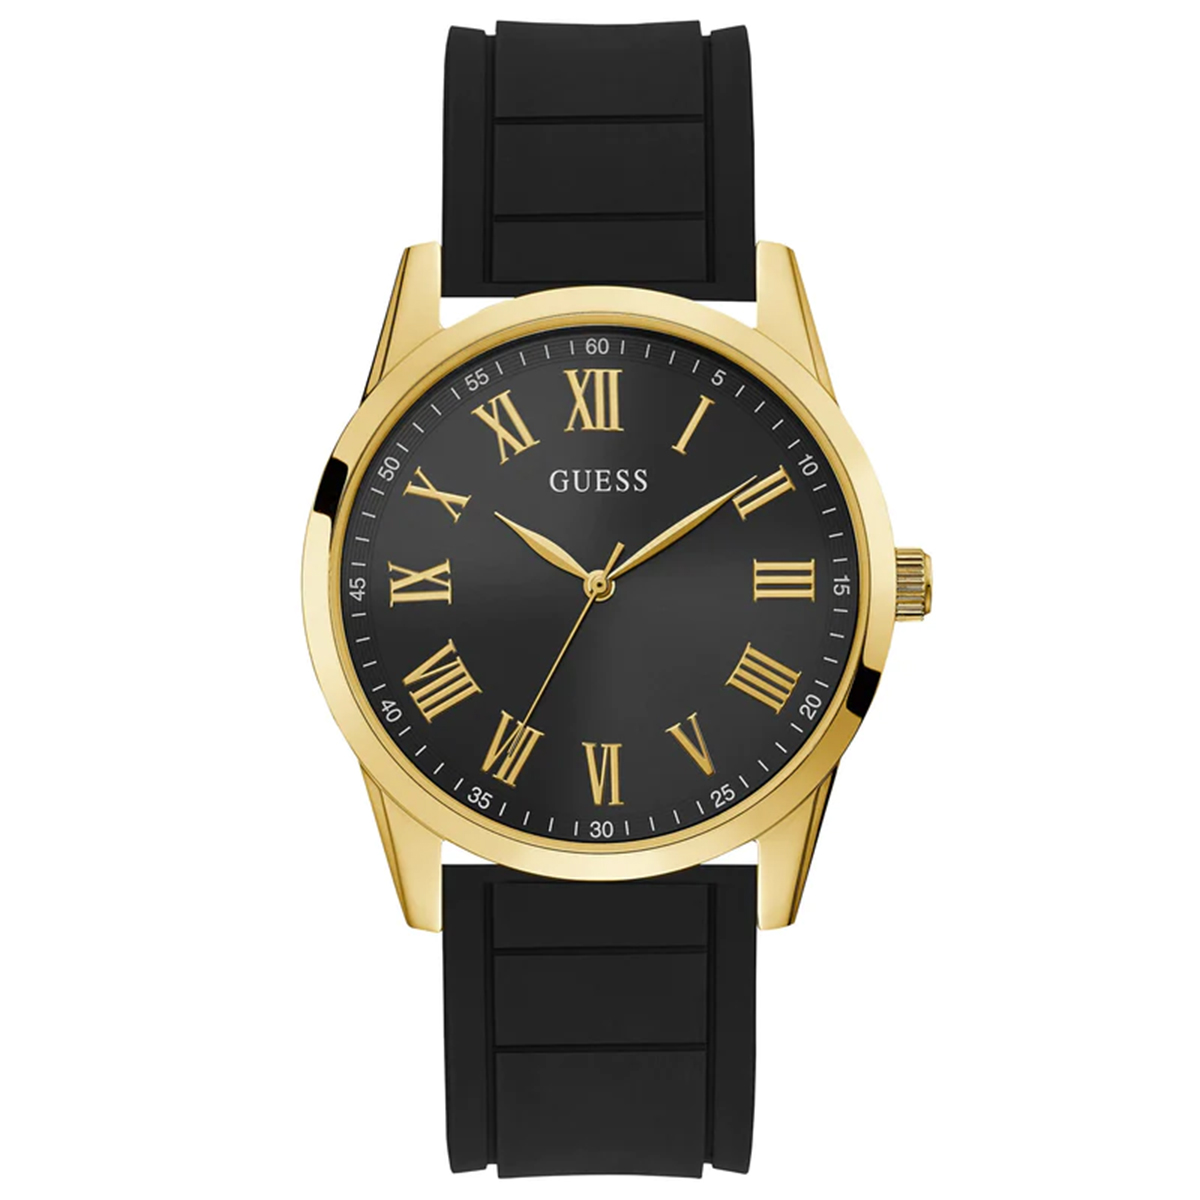 MONTRE GUESS CHARTER  HOMME SILICONE